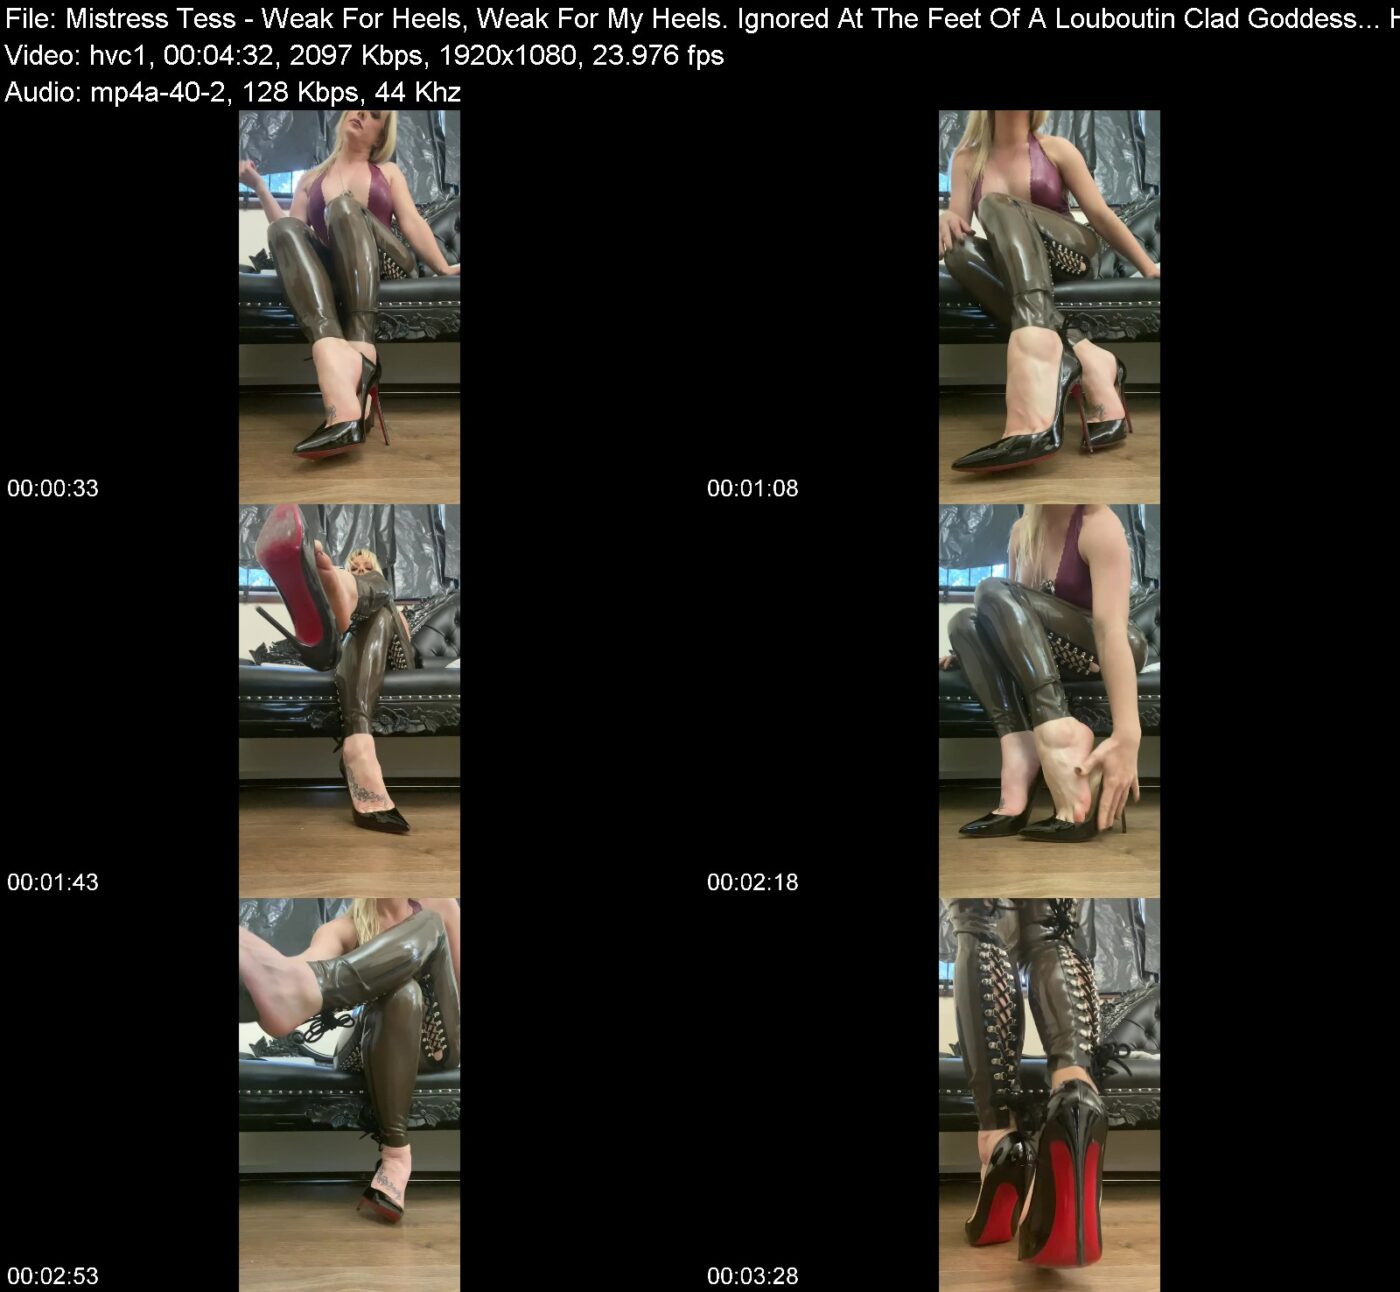 Mistress Tess in Weak For Heels, Weak For My Heels. Ignored At The Feet Of A Louboutin Clad Goddess... Hypn